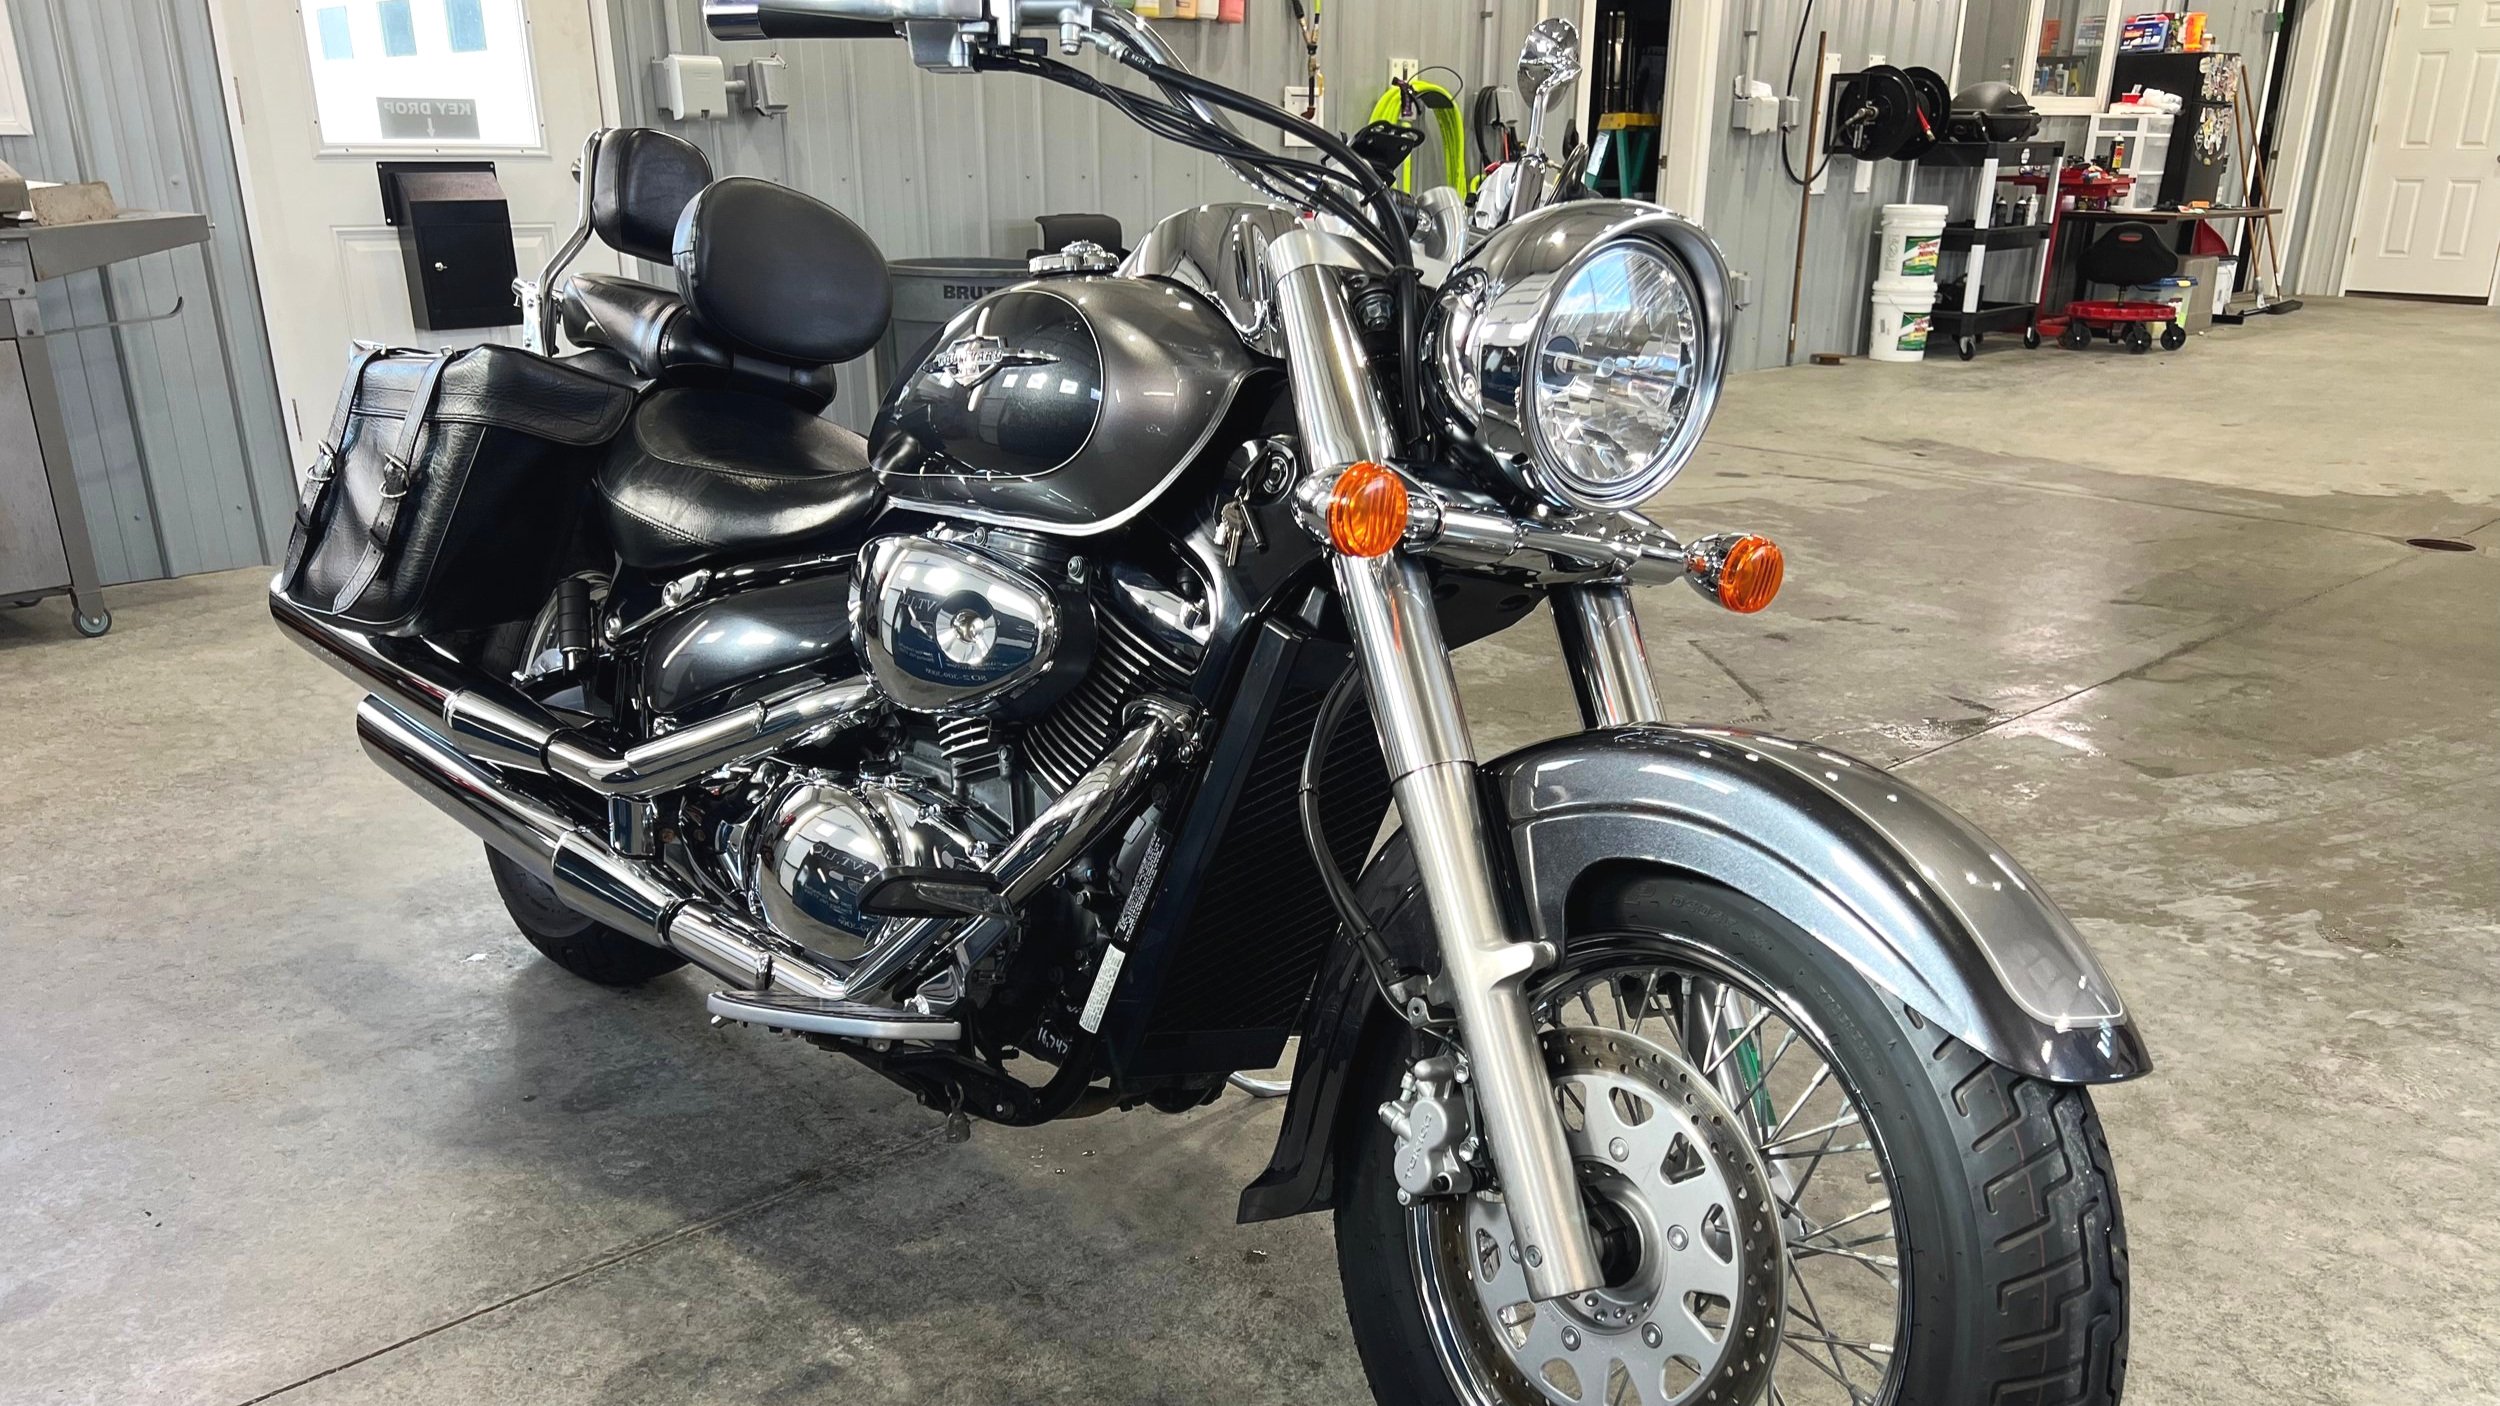 Clean Motorcycle Professional Detailed by Gloss Guru, VT in Enosburg Vermont, Franklin County. 